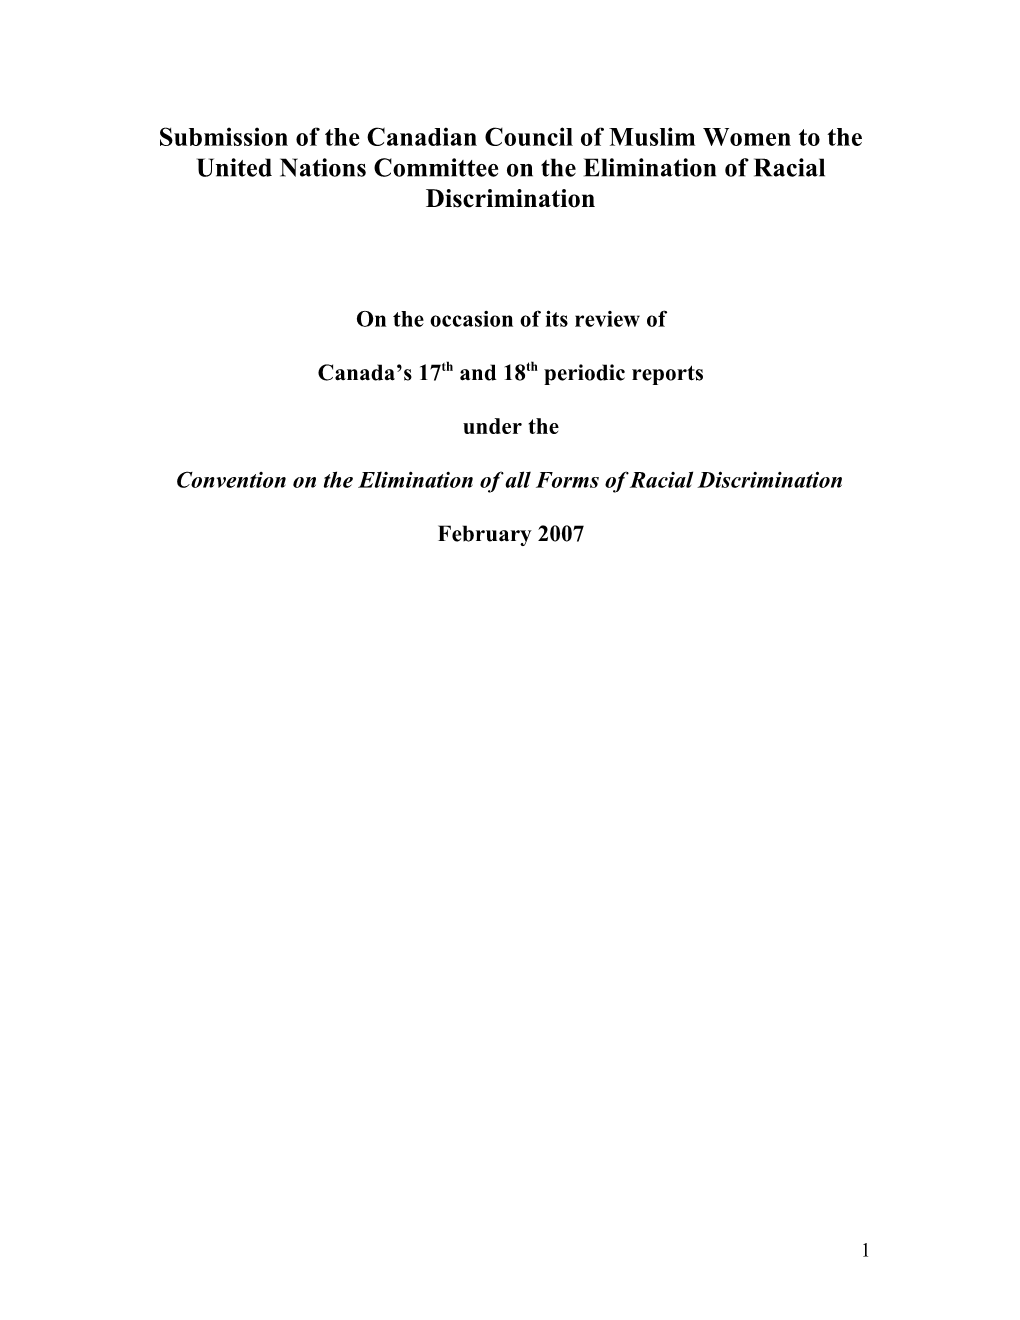 Submission of the Canadian Council of Muslim Women to the United Nations Committee on The